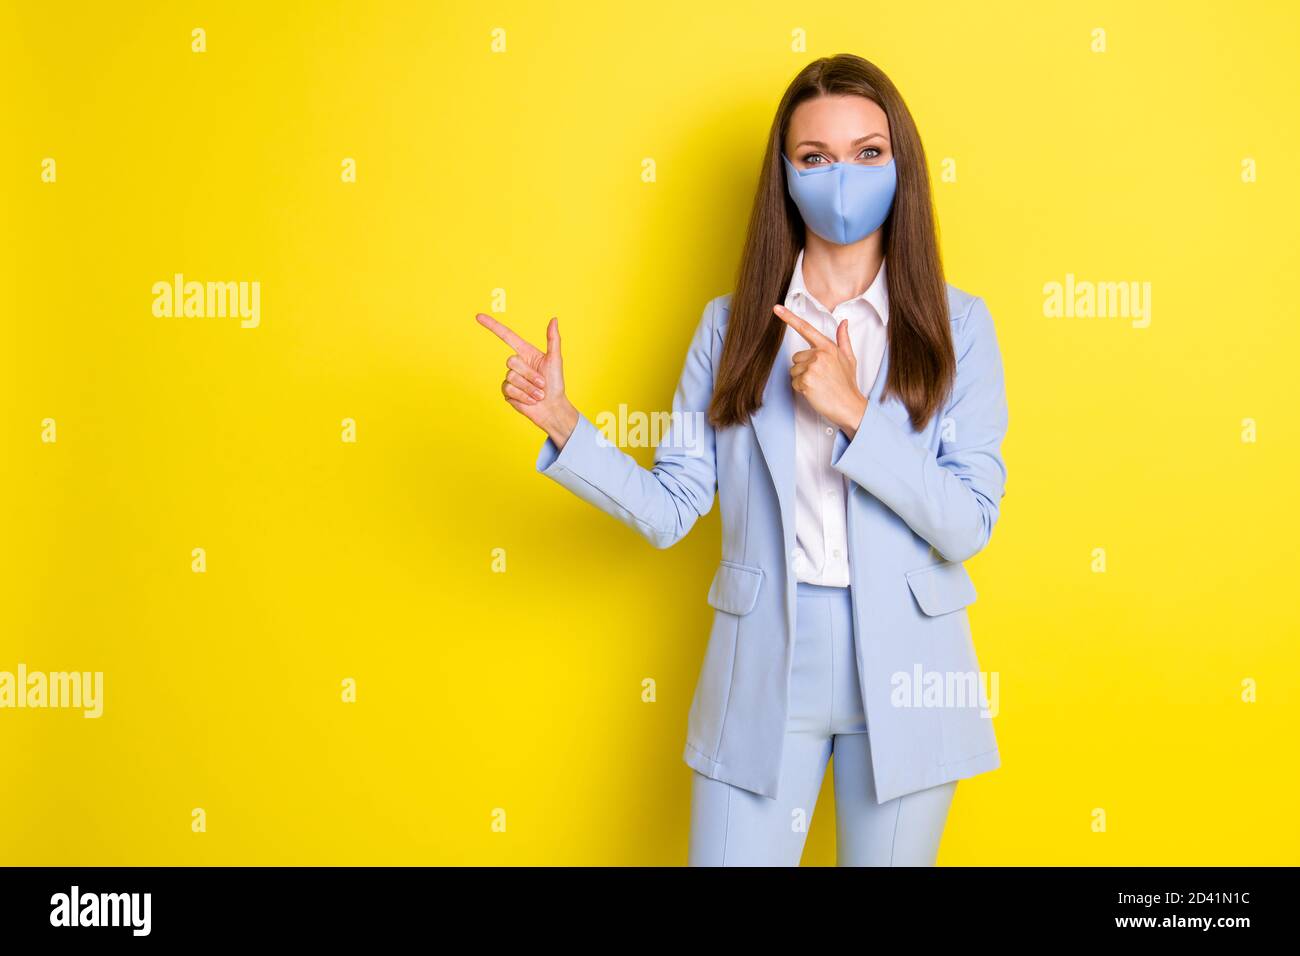 Photo of boss executive business lady point index finger copyspace present covid ads promotion wear blue jacket blazer pants trousers medical mask Stock Photo